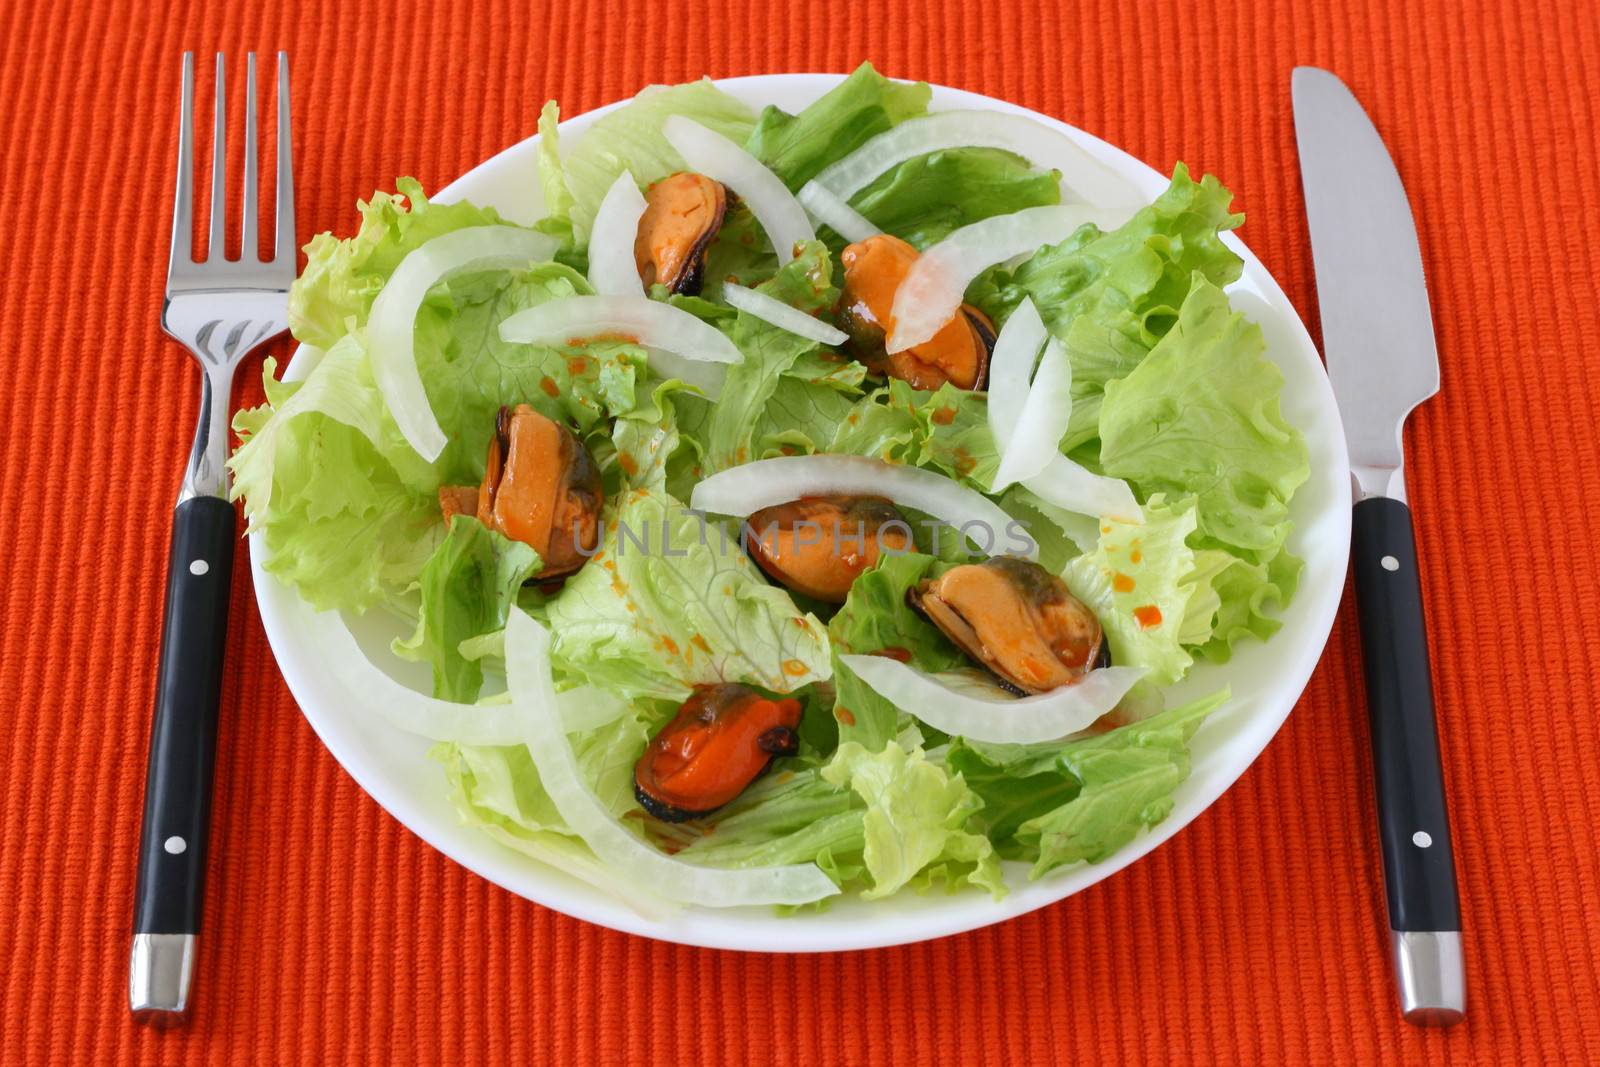 salad with mussels